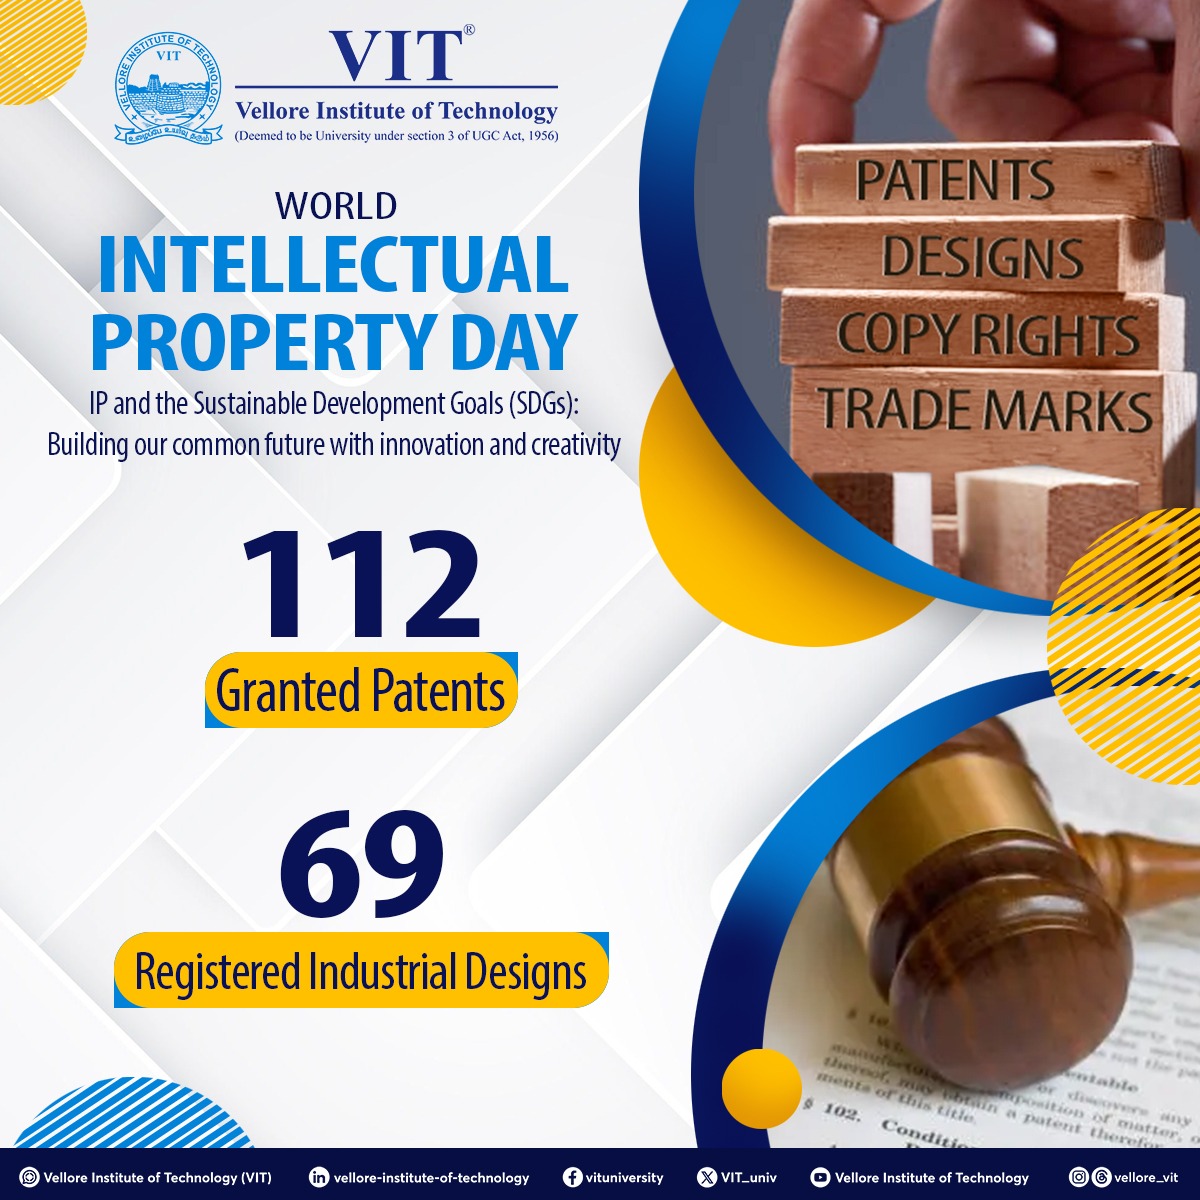 Breaking more barriers! On this World Intellectual Property Day, #VIT proudly claims 112 granted #patents and 69 registered industrial designs under its name. 

#WorldIntellectualPropertyDay #IntellectualProperty #WorldIPDay #VITPatents #WorldIPDay #copyright #trademark #IPLaw